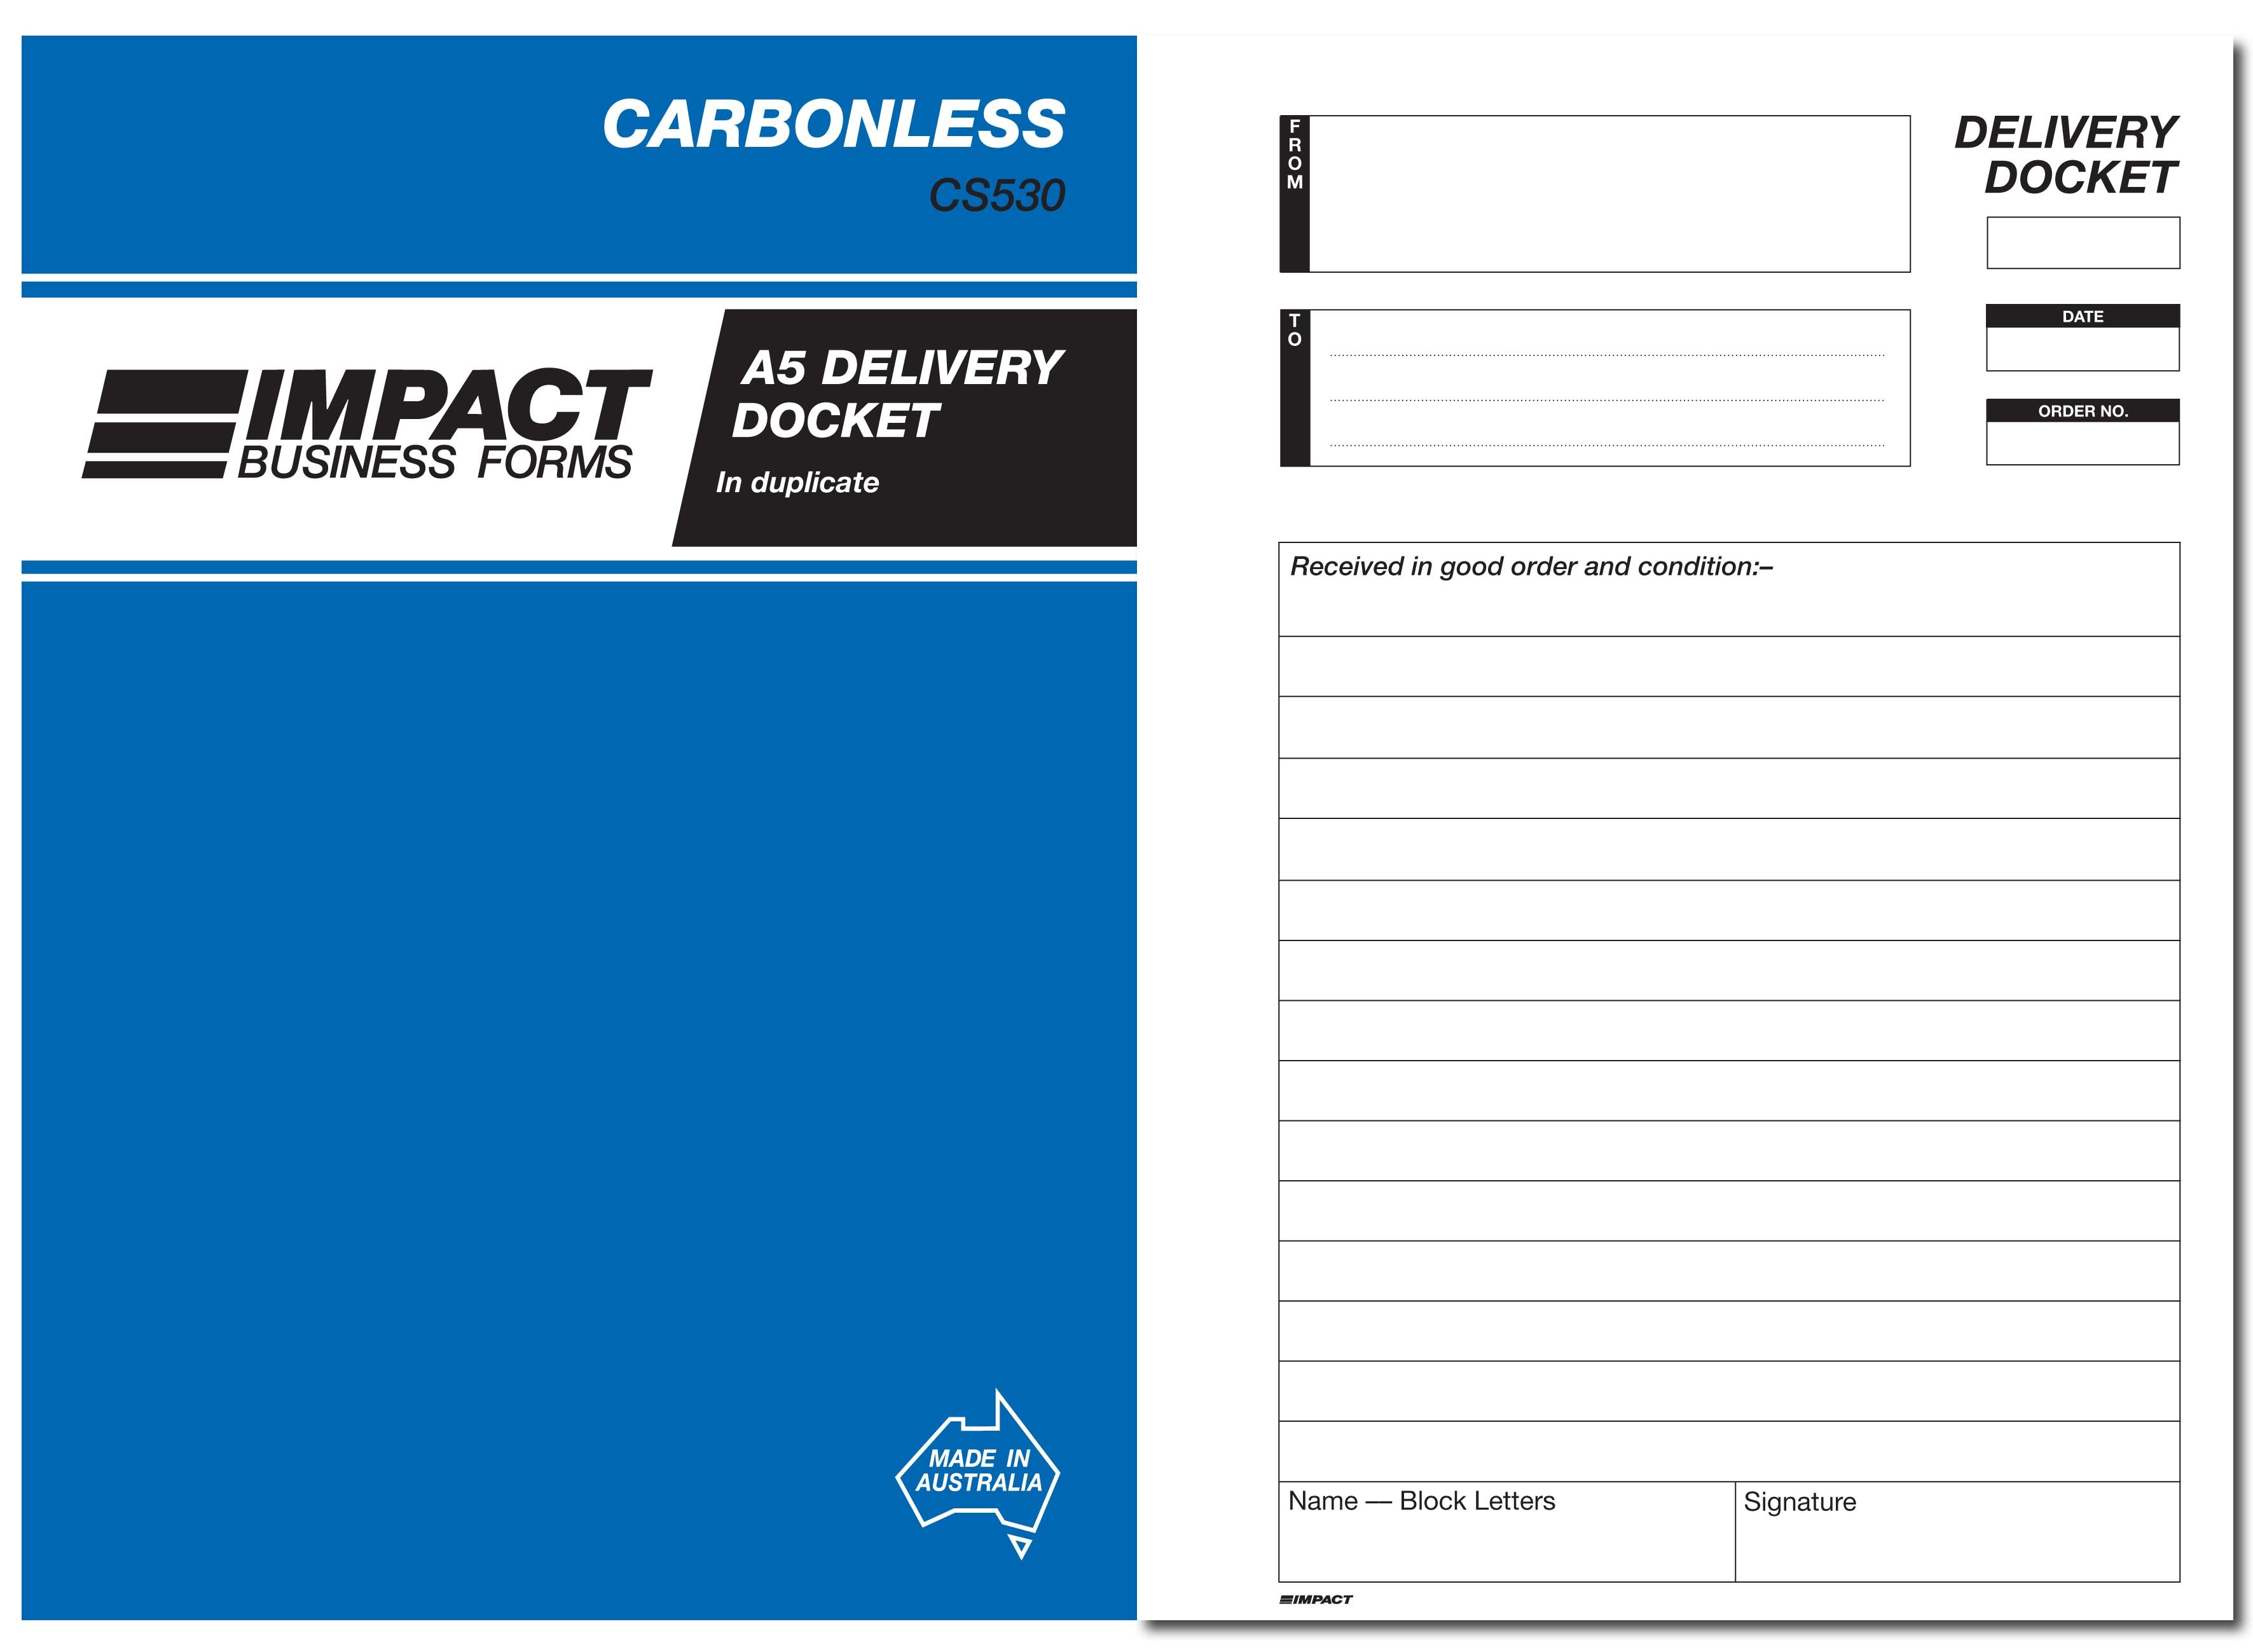 IMPACT CARBONLESS DELIVERY DOCKET BOOK A5 DUP. CS-530 (price excludes gst)